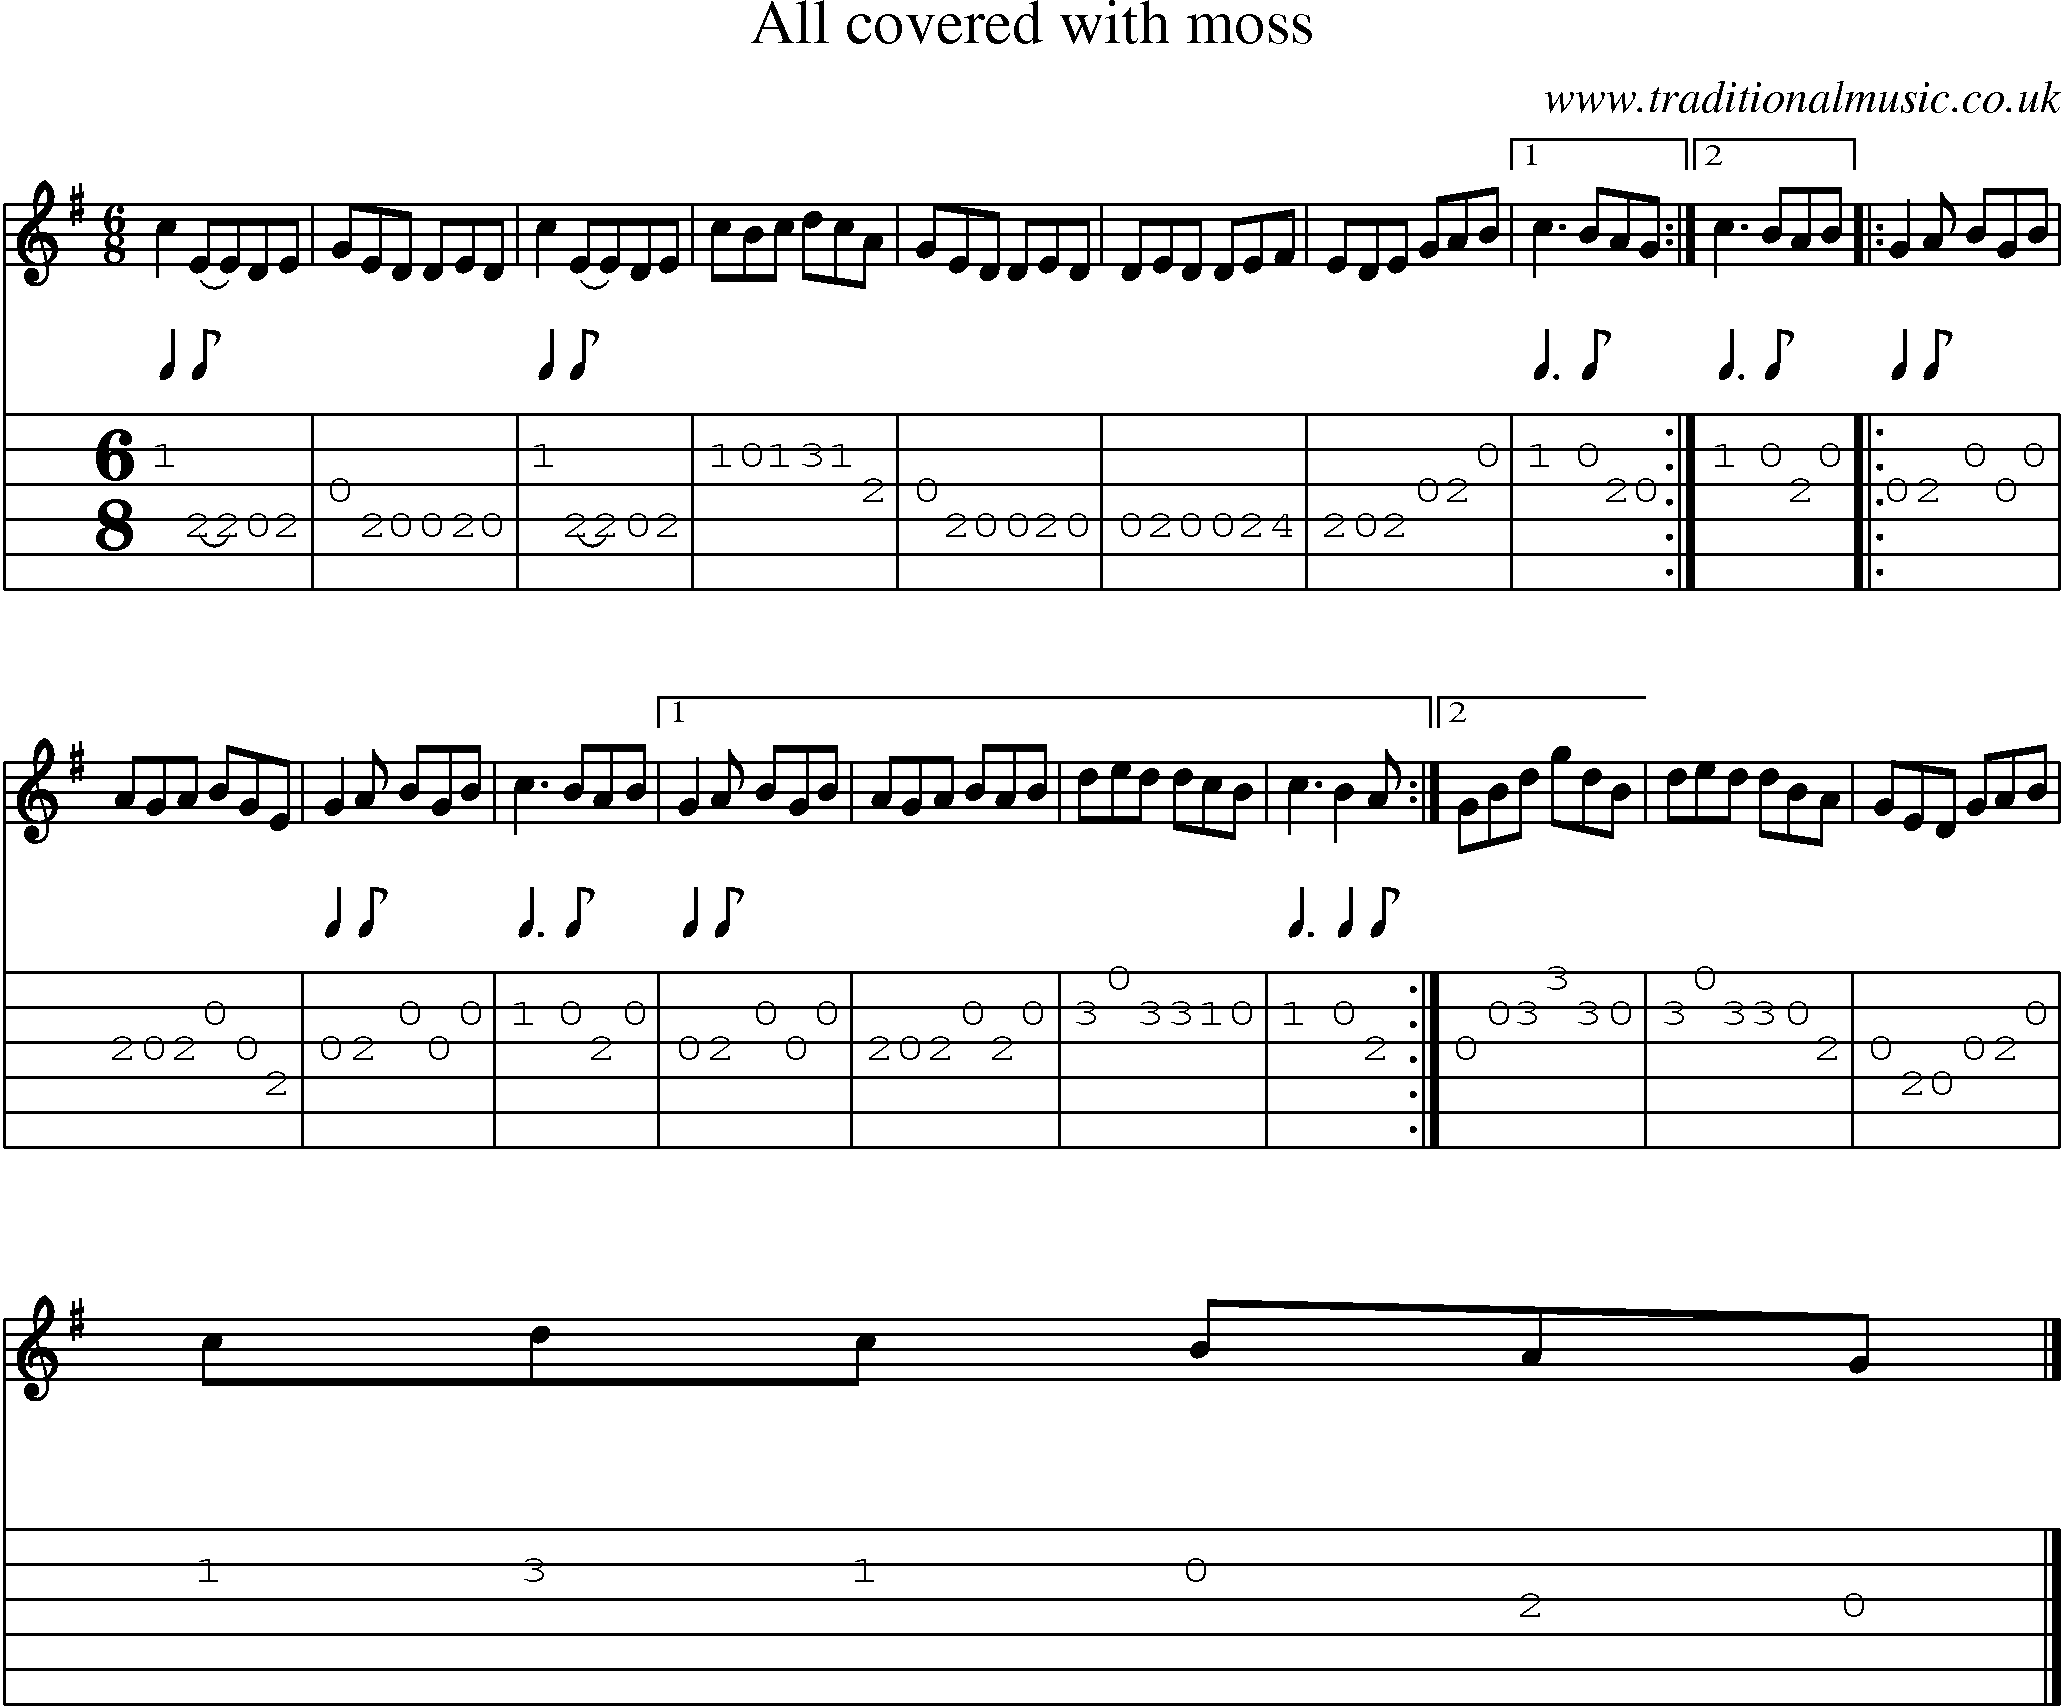 Music Score and Guitar Tabs for All Covered With Moss